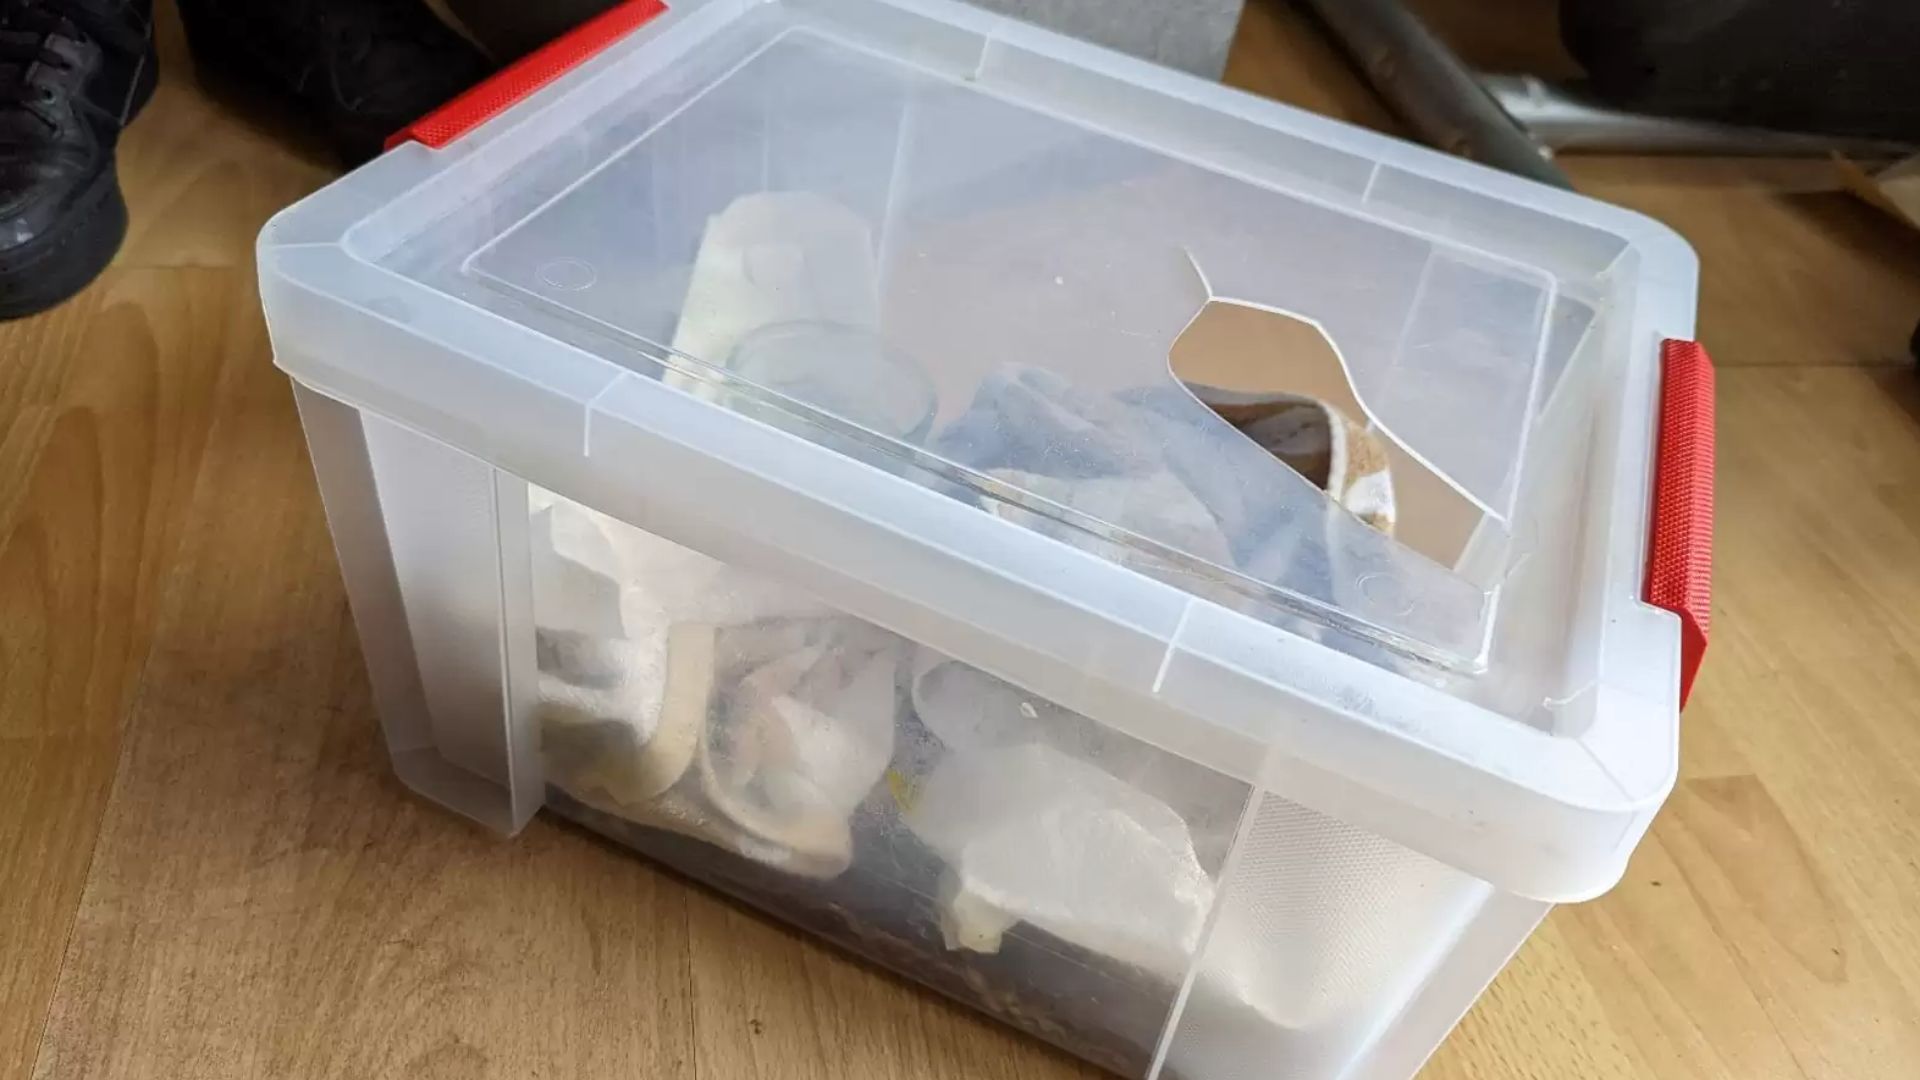 Woman Was Shocked When She Realized What Was Inside Plastic Box On The Side Of Road